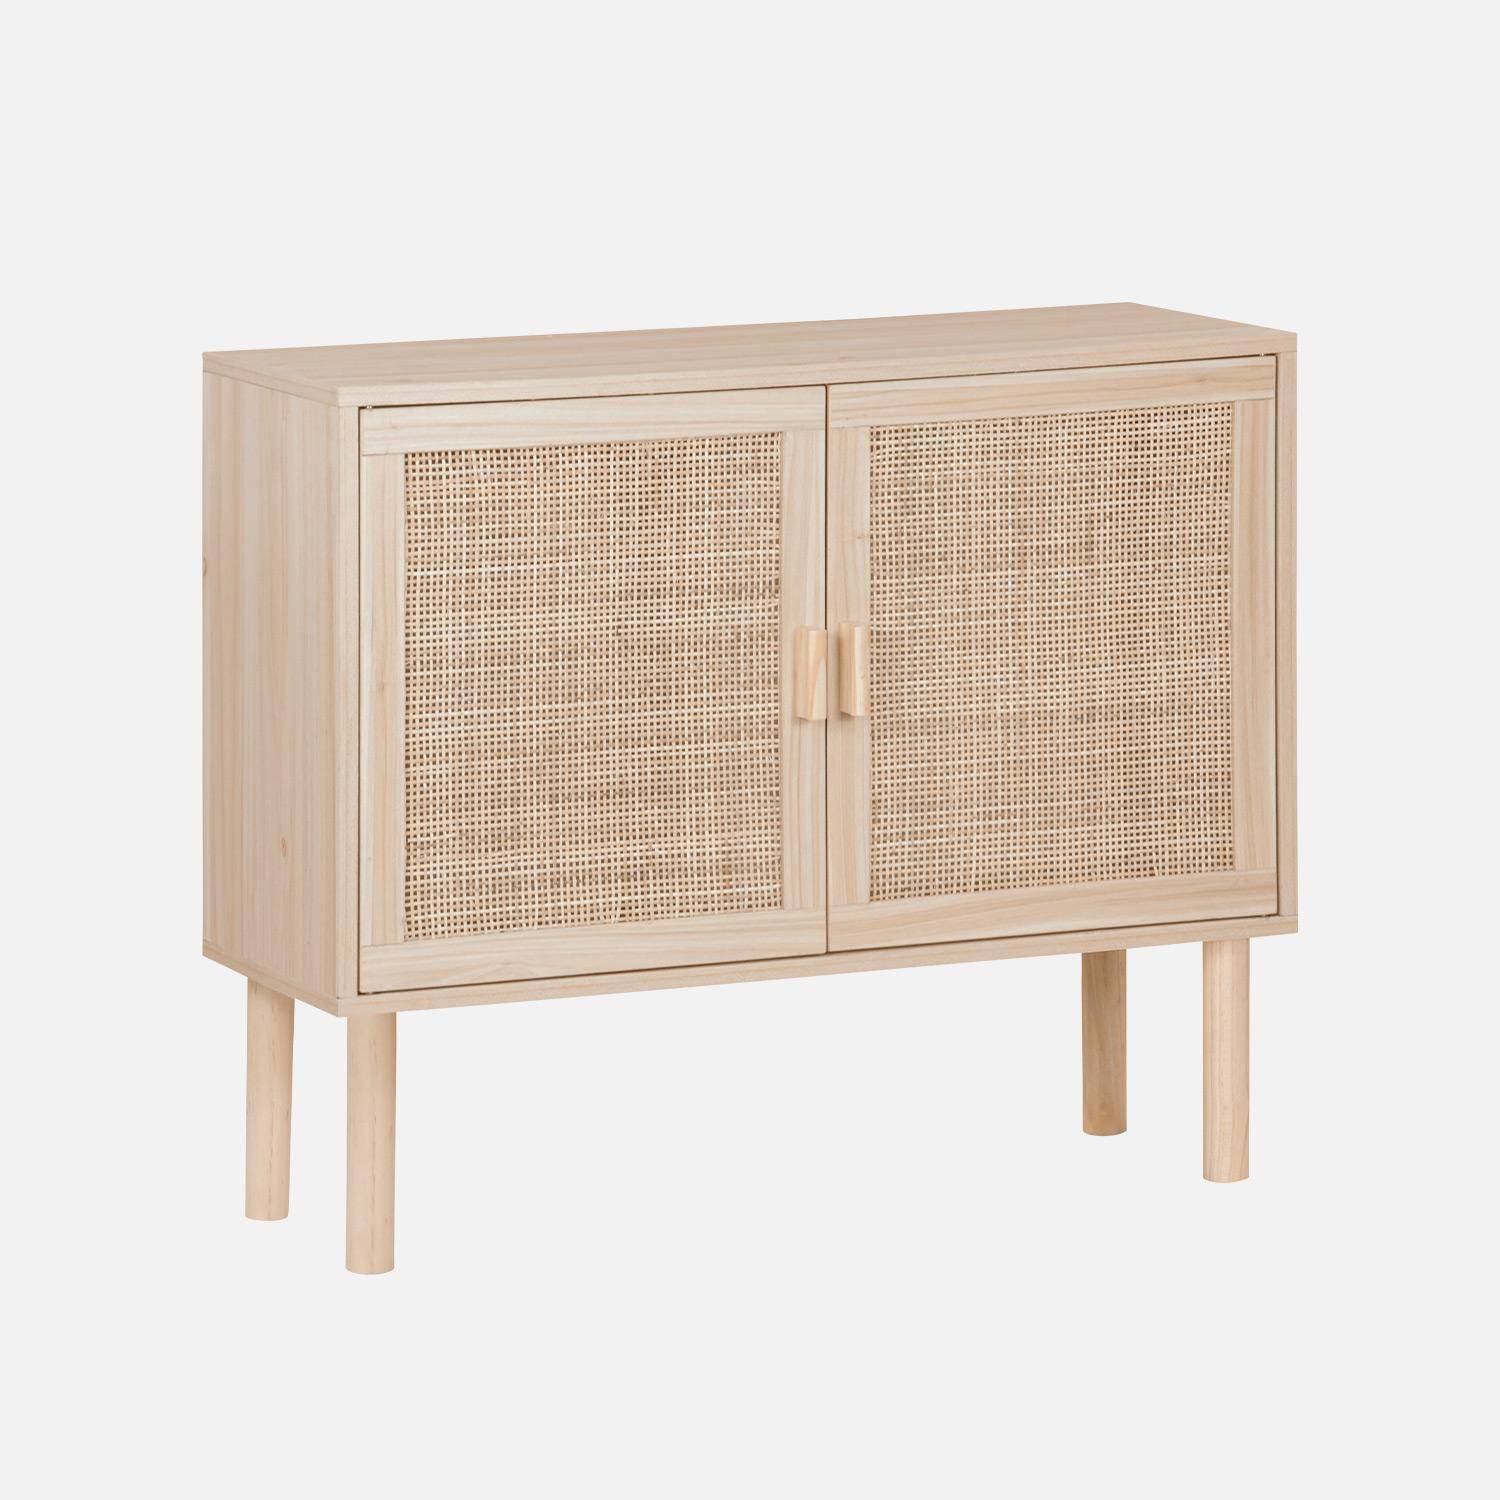 Wood and woven rattan 2-door storage cabinet with shelves, 80x30x68cm, Camargue, Natural,sweeek,Photo3